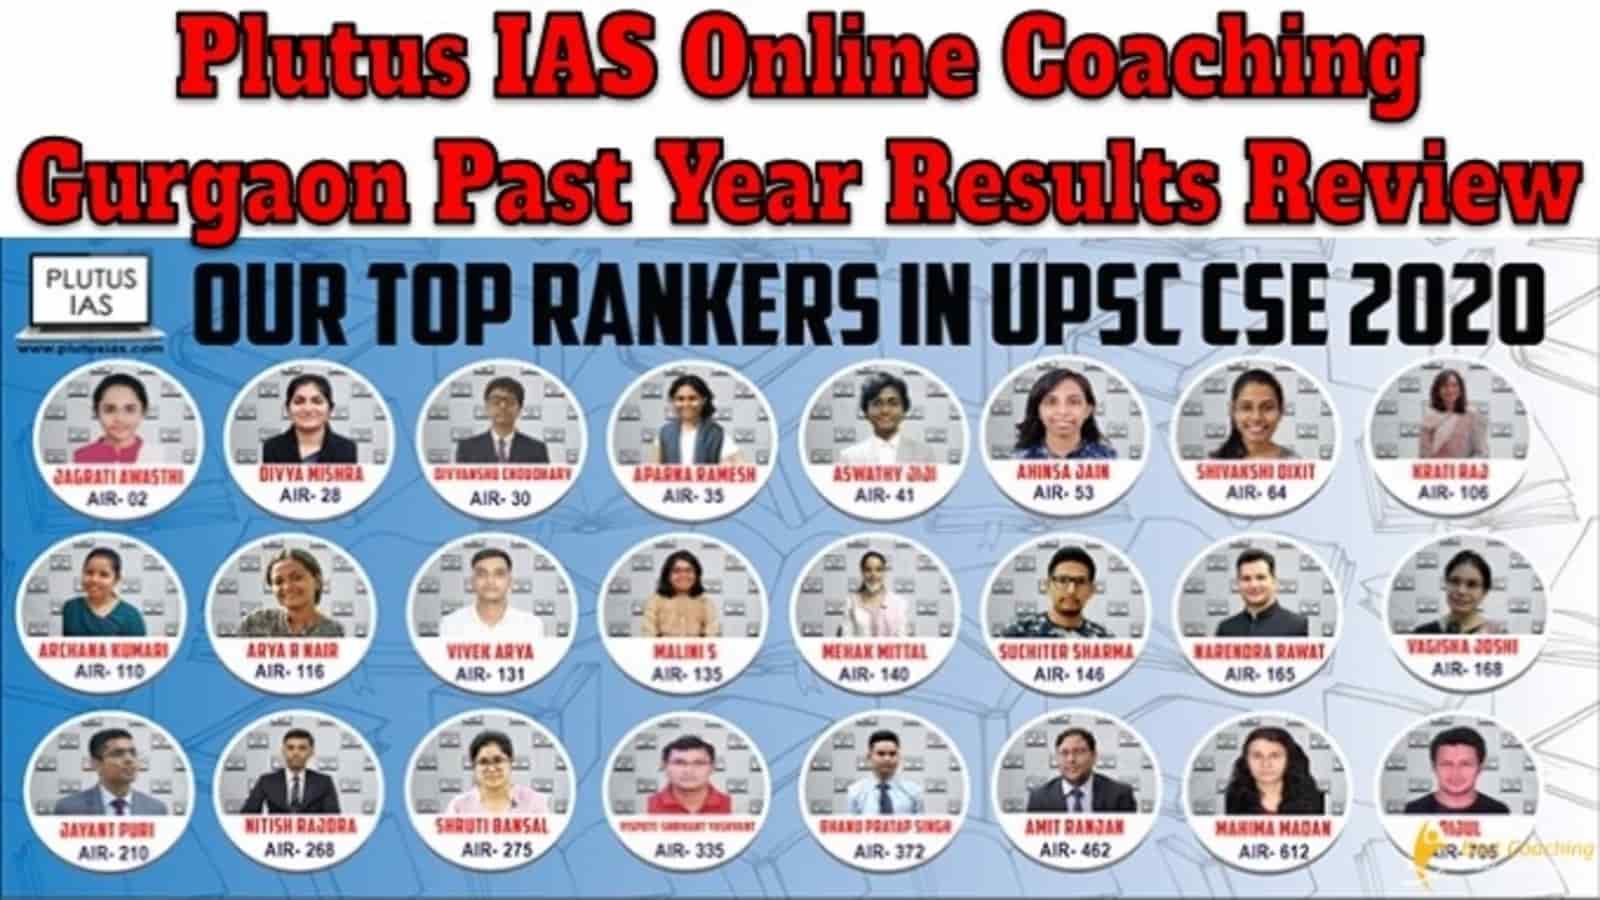 Plutus IAS Online Coaching Gurgaon Past Year Results Review